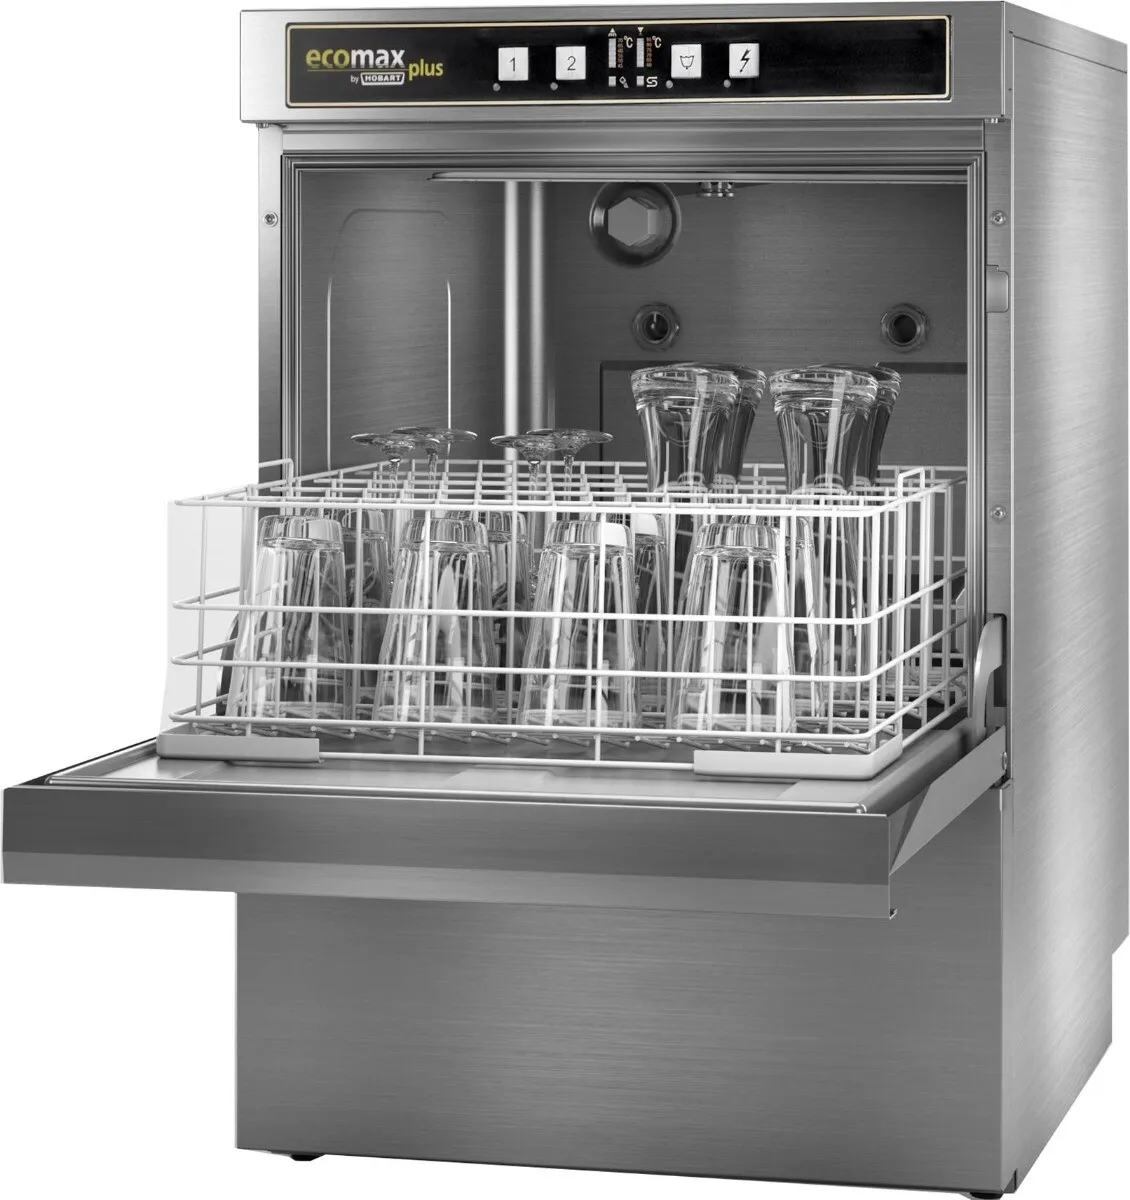 Hobart Ecomax Plus G515W-10C Undercounter Glasswasher WRAS Approved 500mm Rack